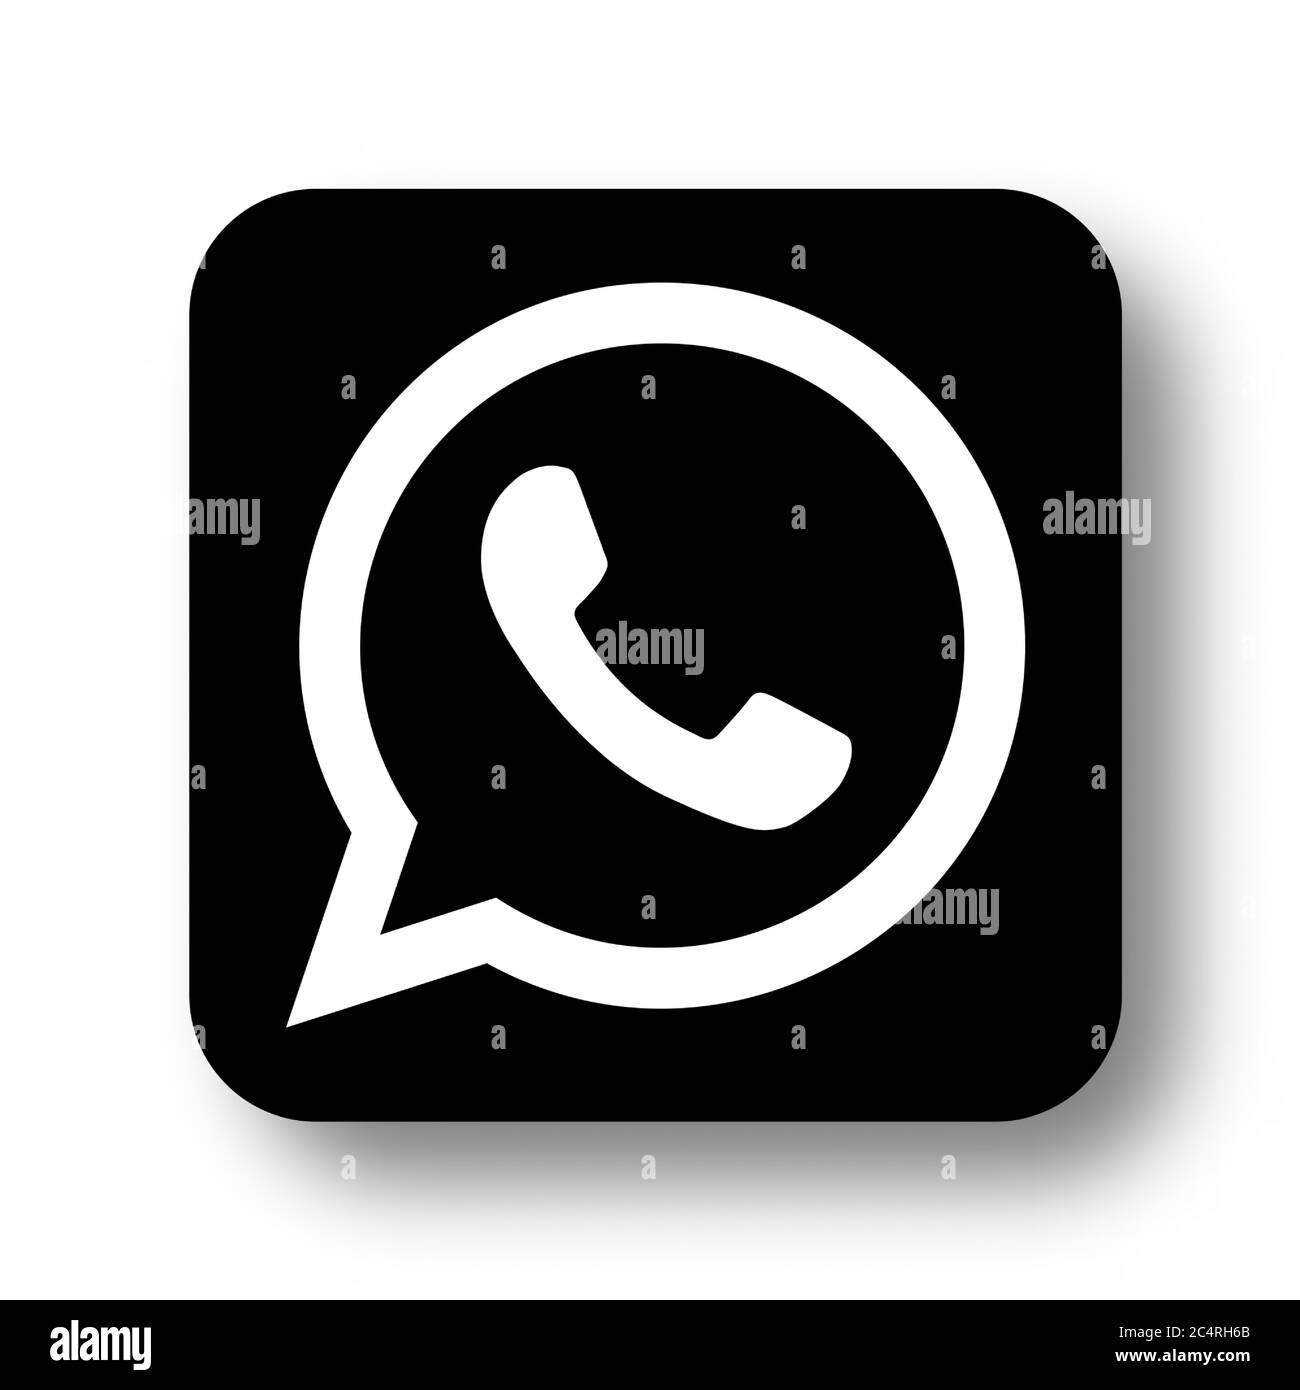 VORONEZH, RUSSIA - JANUARY 31, 2020: Whatsapp logo black square icon with soft shadow Stock Vector